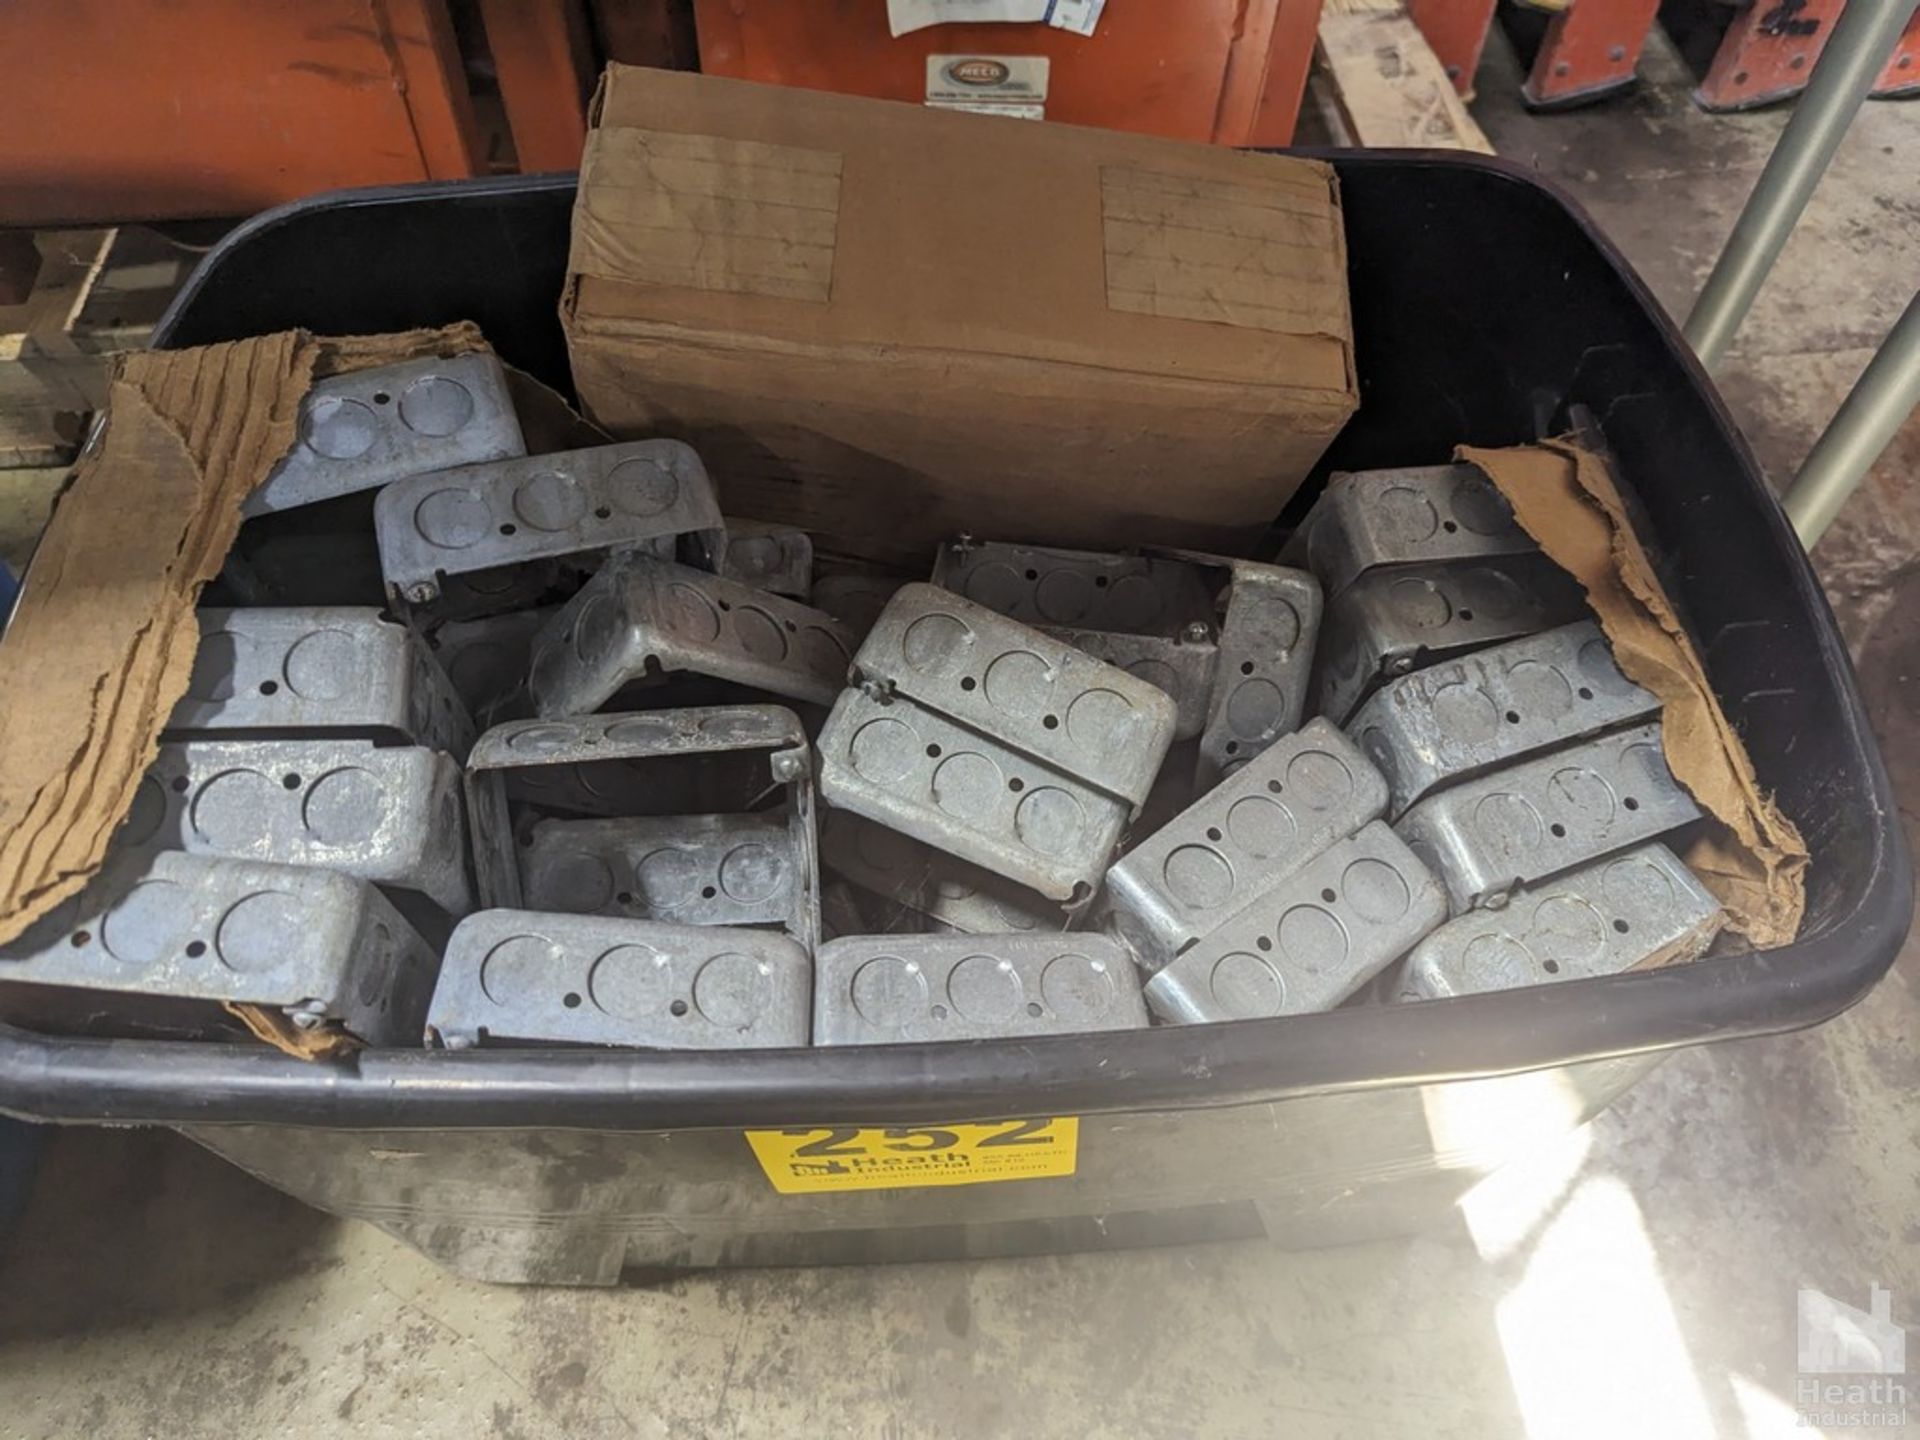 LARGE QUANTITY OF ELECTRICAL BOXES IN TOTE